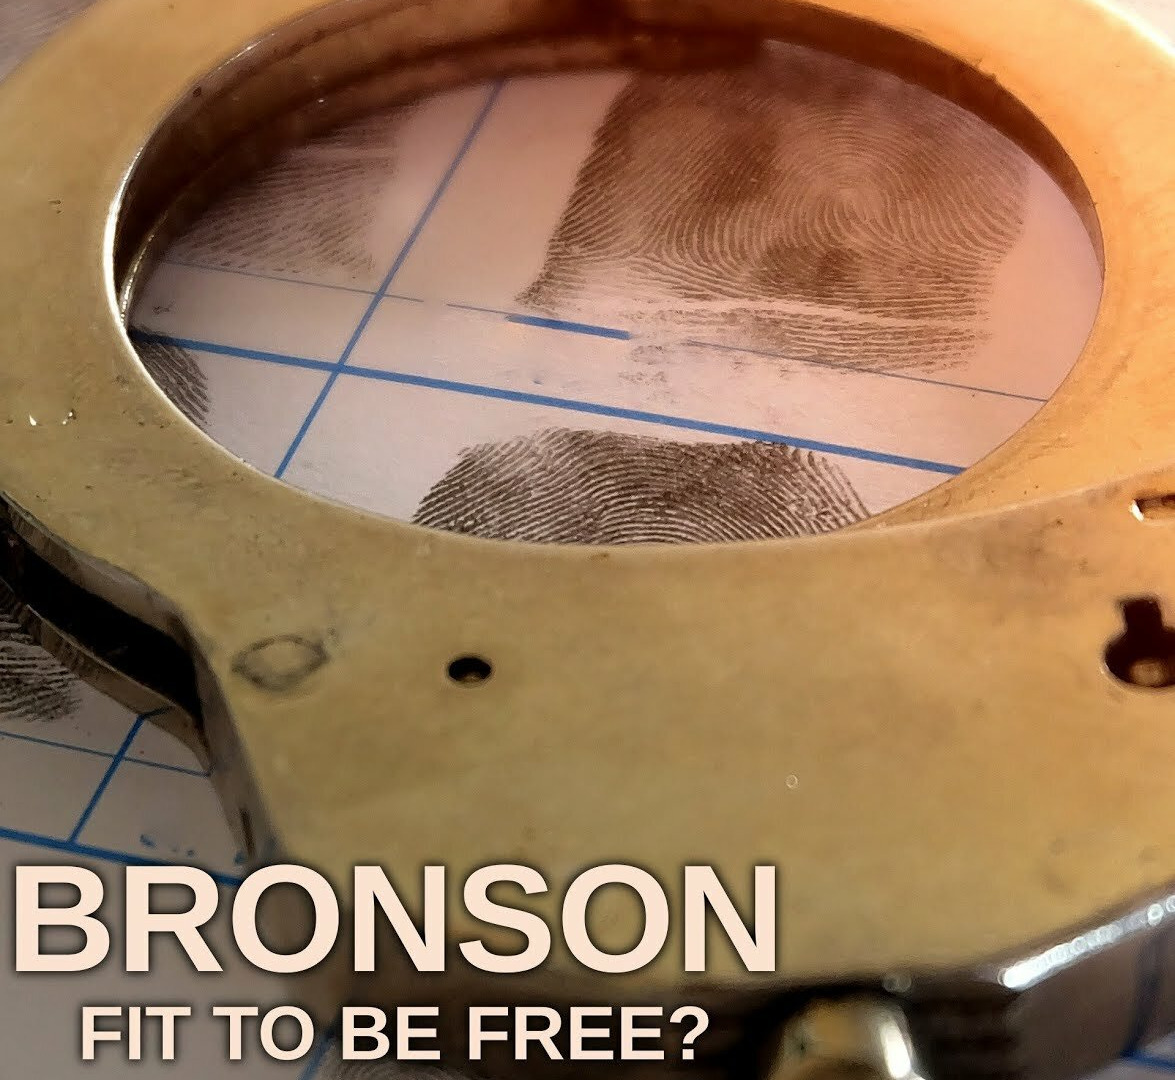 Show Bronson: Fit to Be Free?